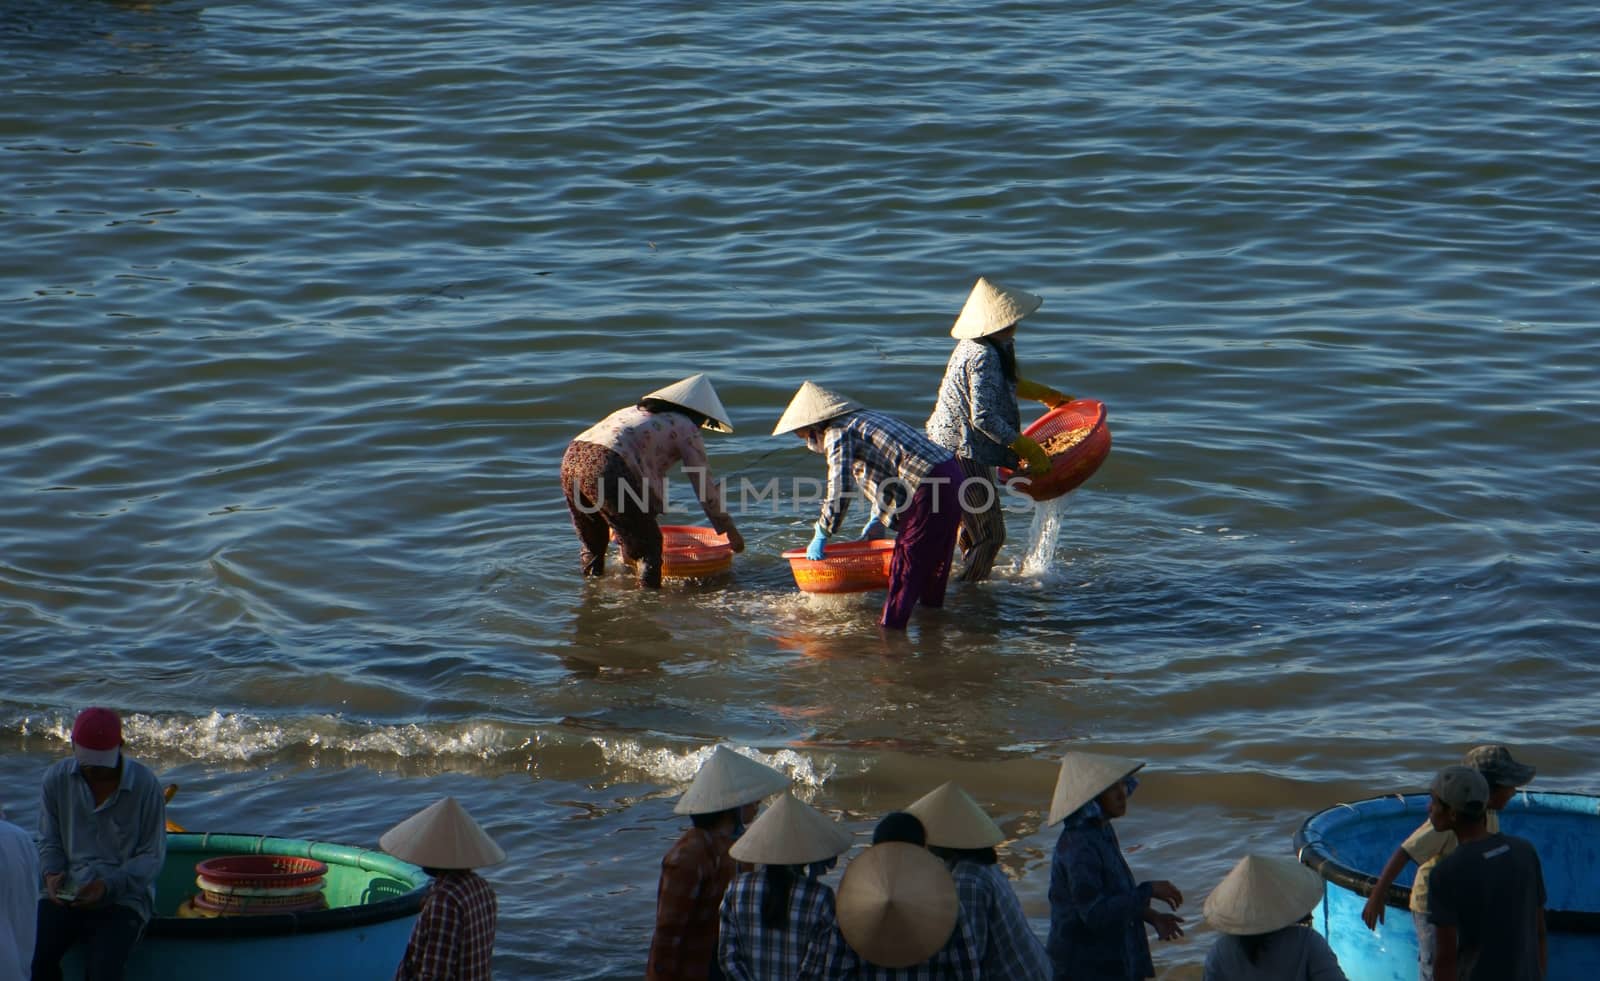 PHAN THIET, VIET NAM- FEB 3: People clean seafood with water on beach in Phan Thiet, Viet Nam on Feb 3, 2013